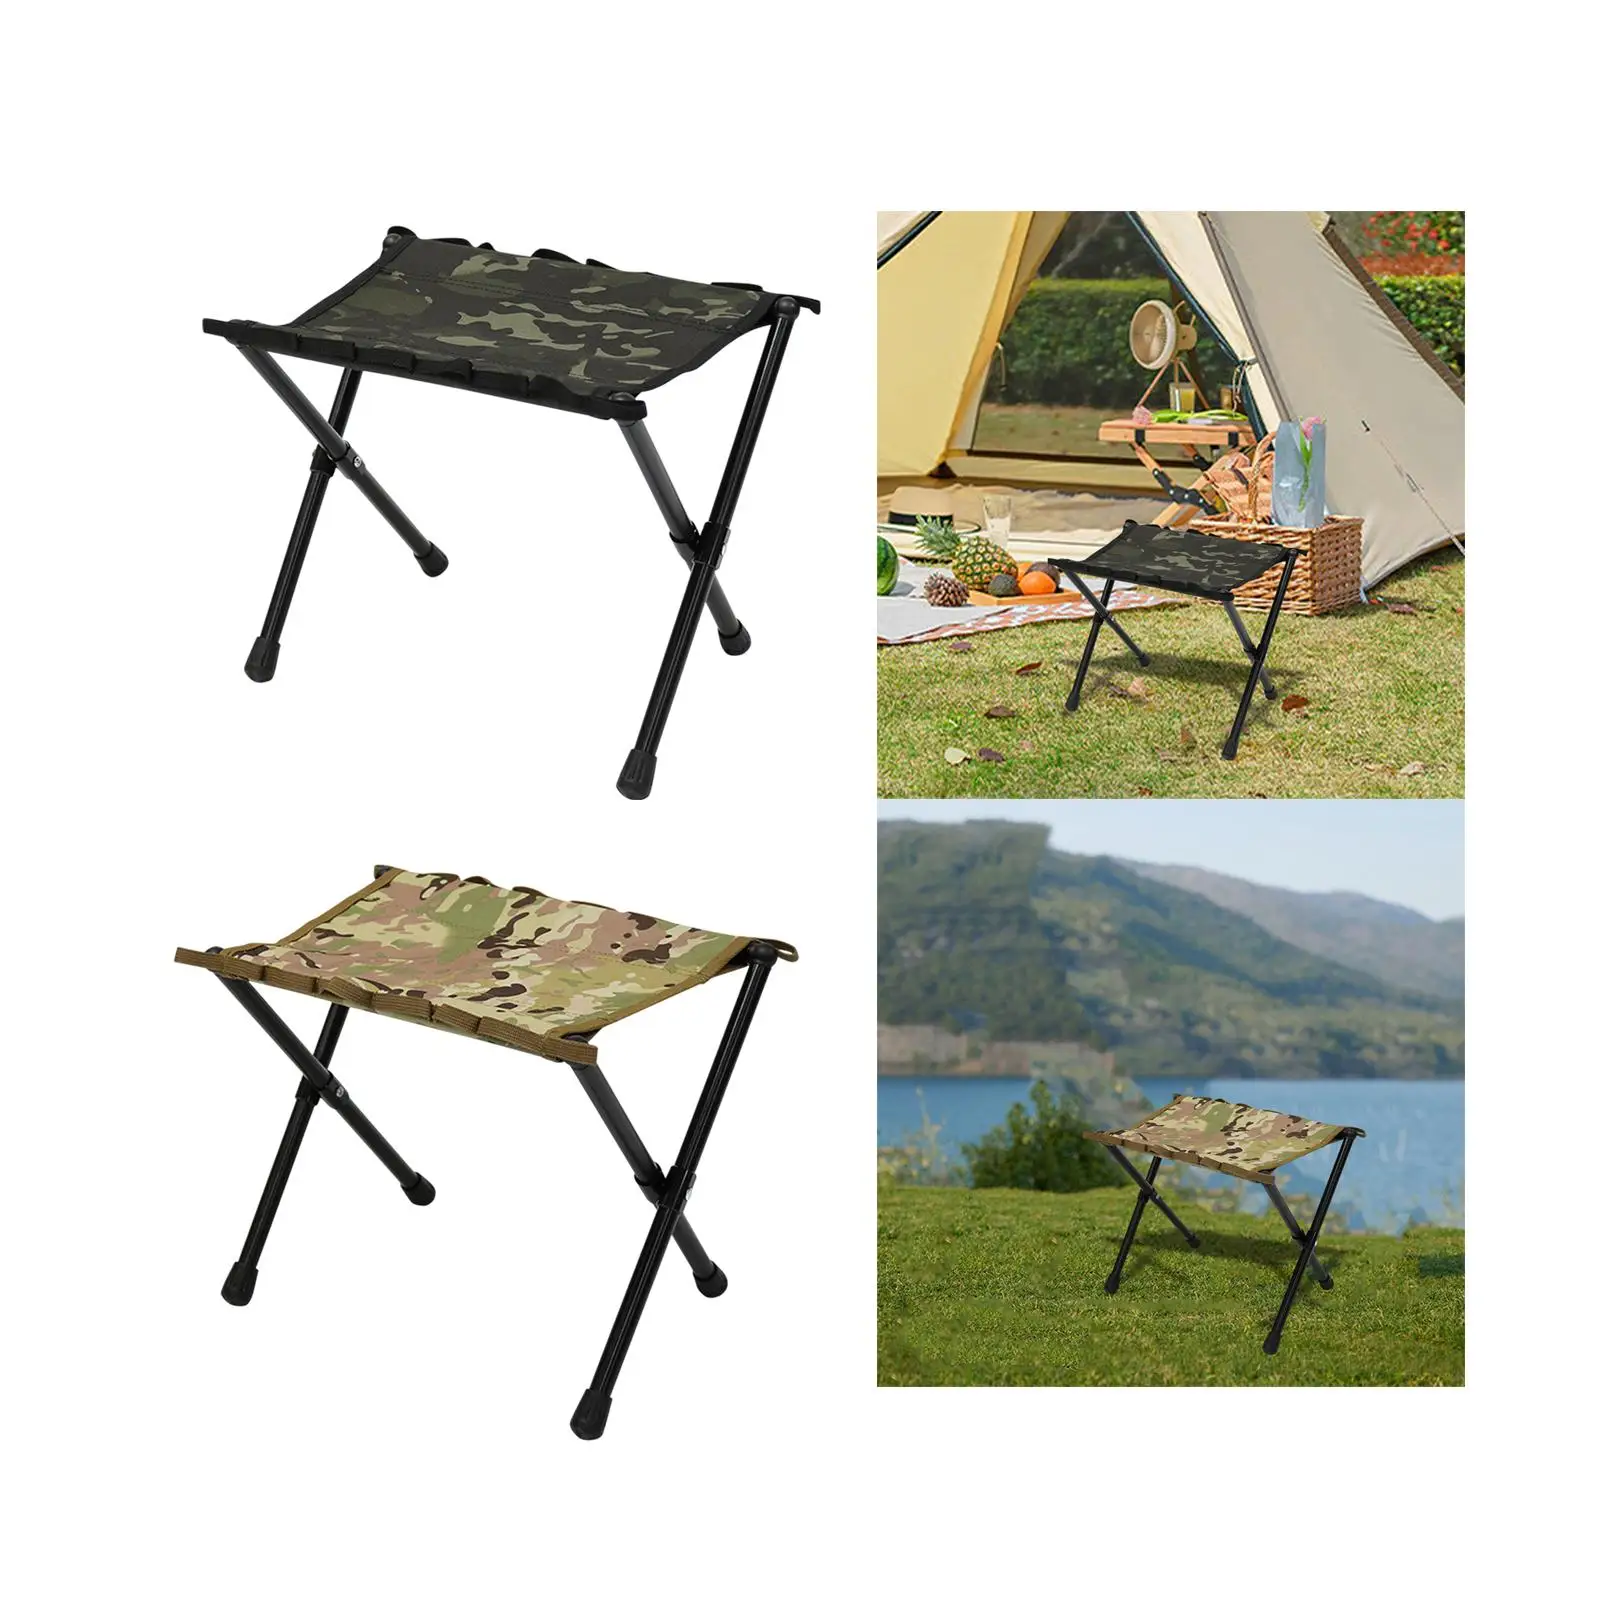 Folding Stool Camping Outdoor Adults Foldable Footstool Fishing Chairs Saddle Chair for Backpacking Beach Walking Garden Picnic